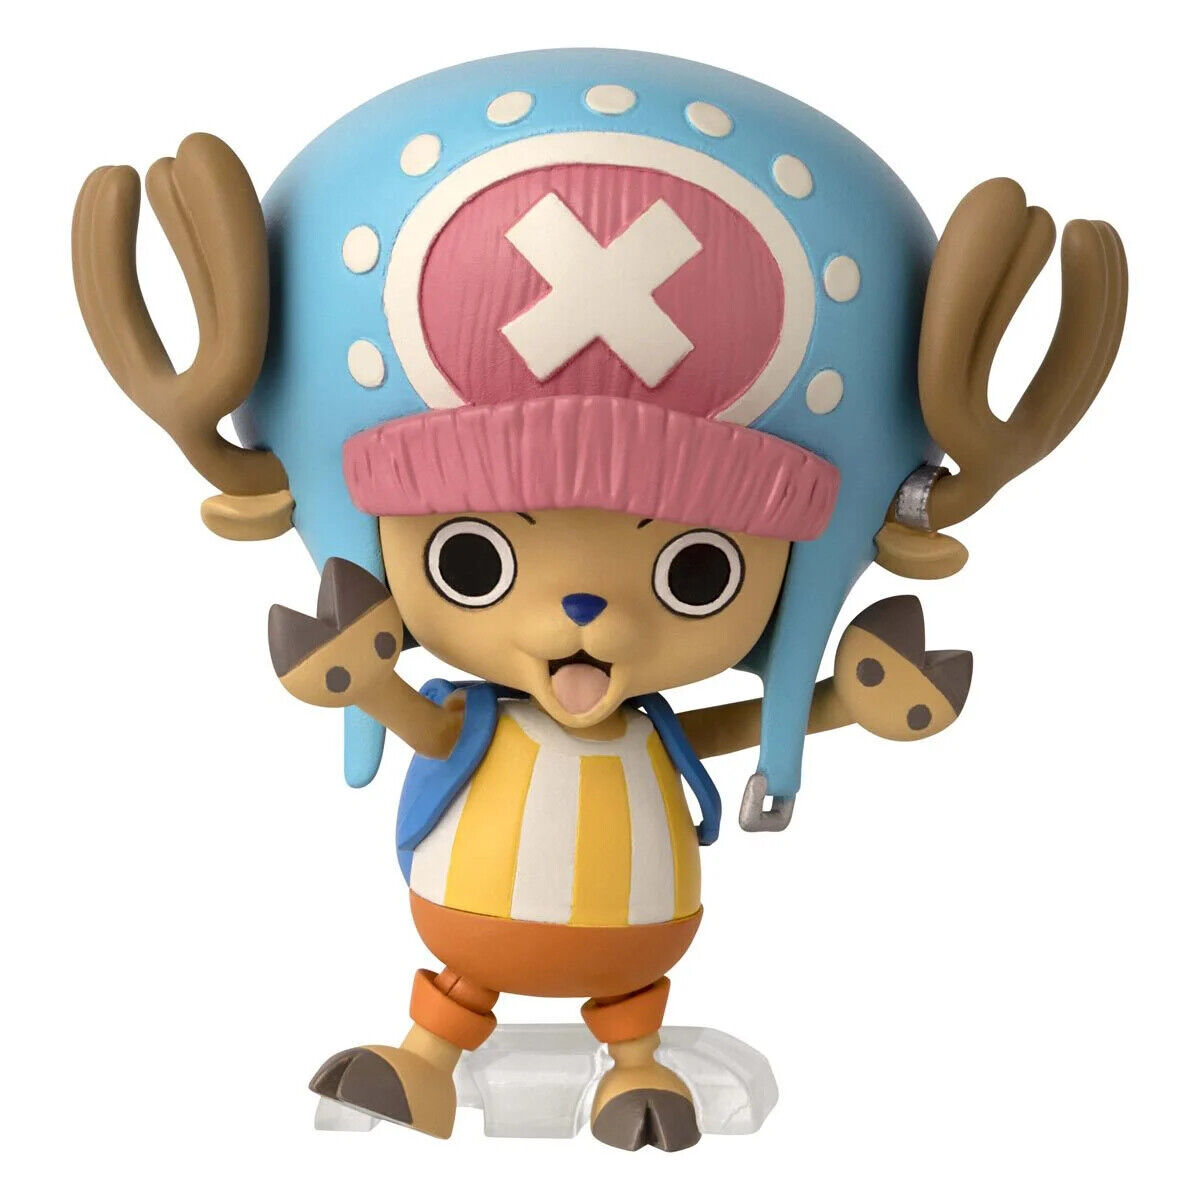 17 Facts About Tony Tony Chopper (One Piece) - Facts.net